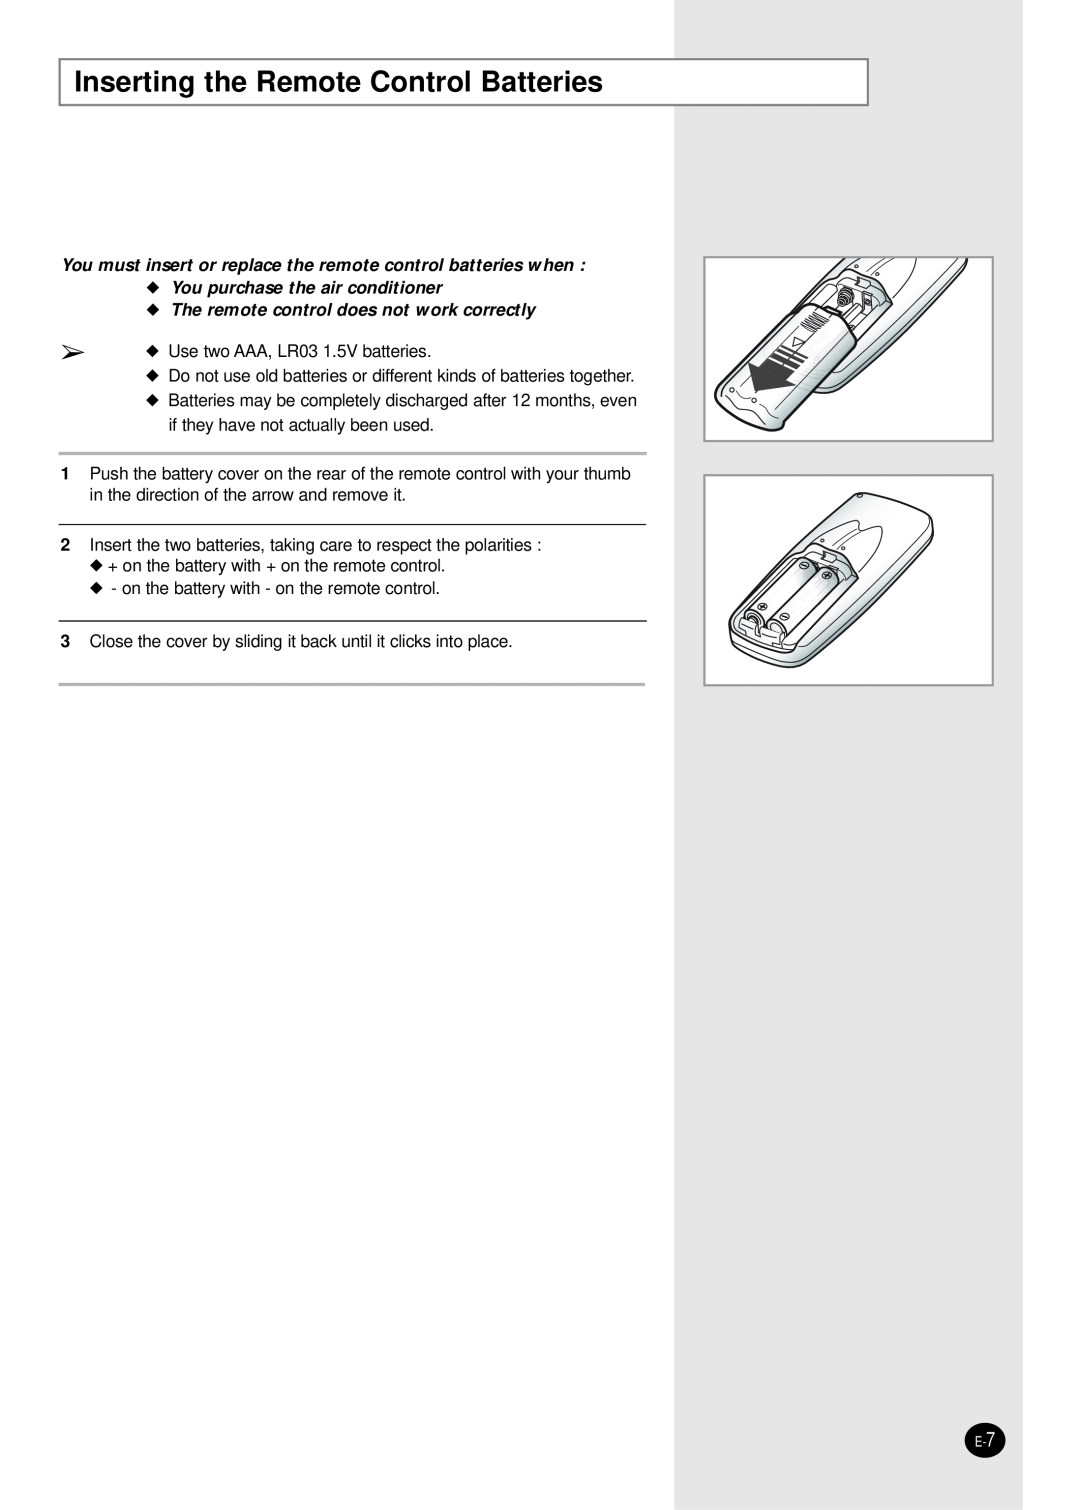 Samsung manual Inserting the Remote Control Batteries, You purchase the air conditioner 